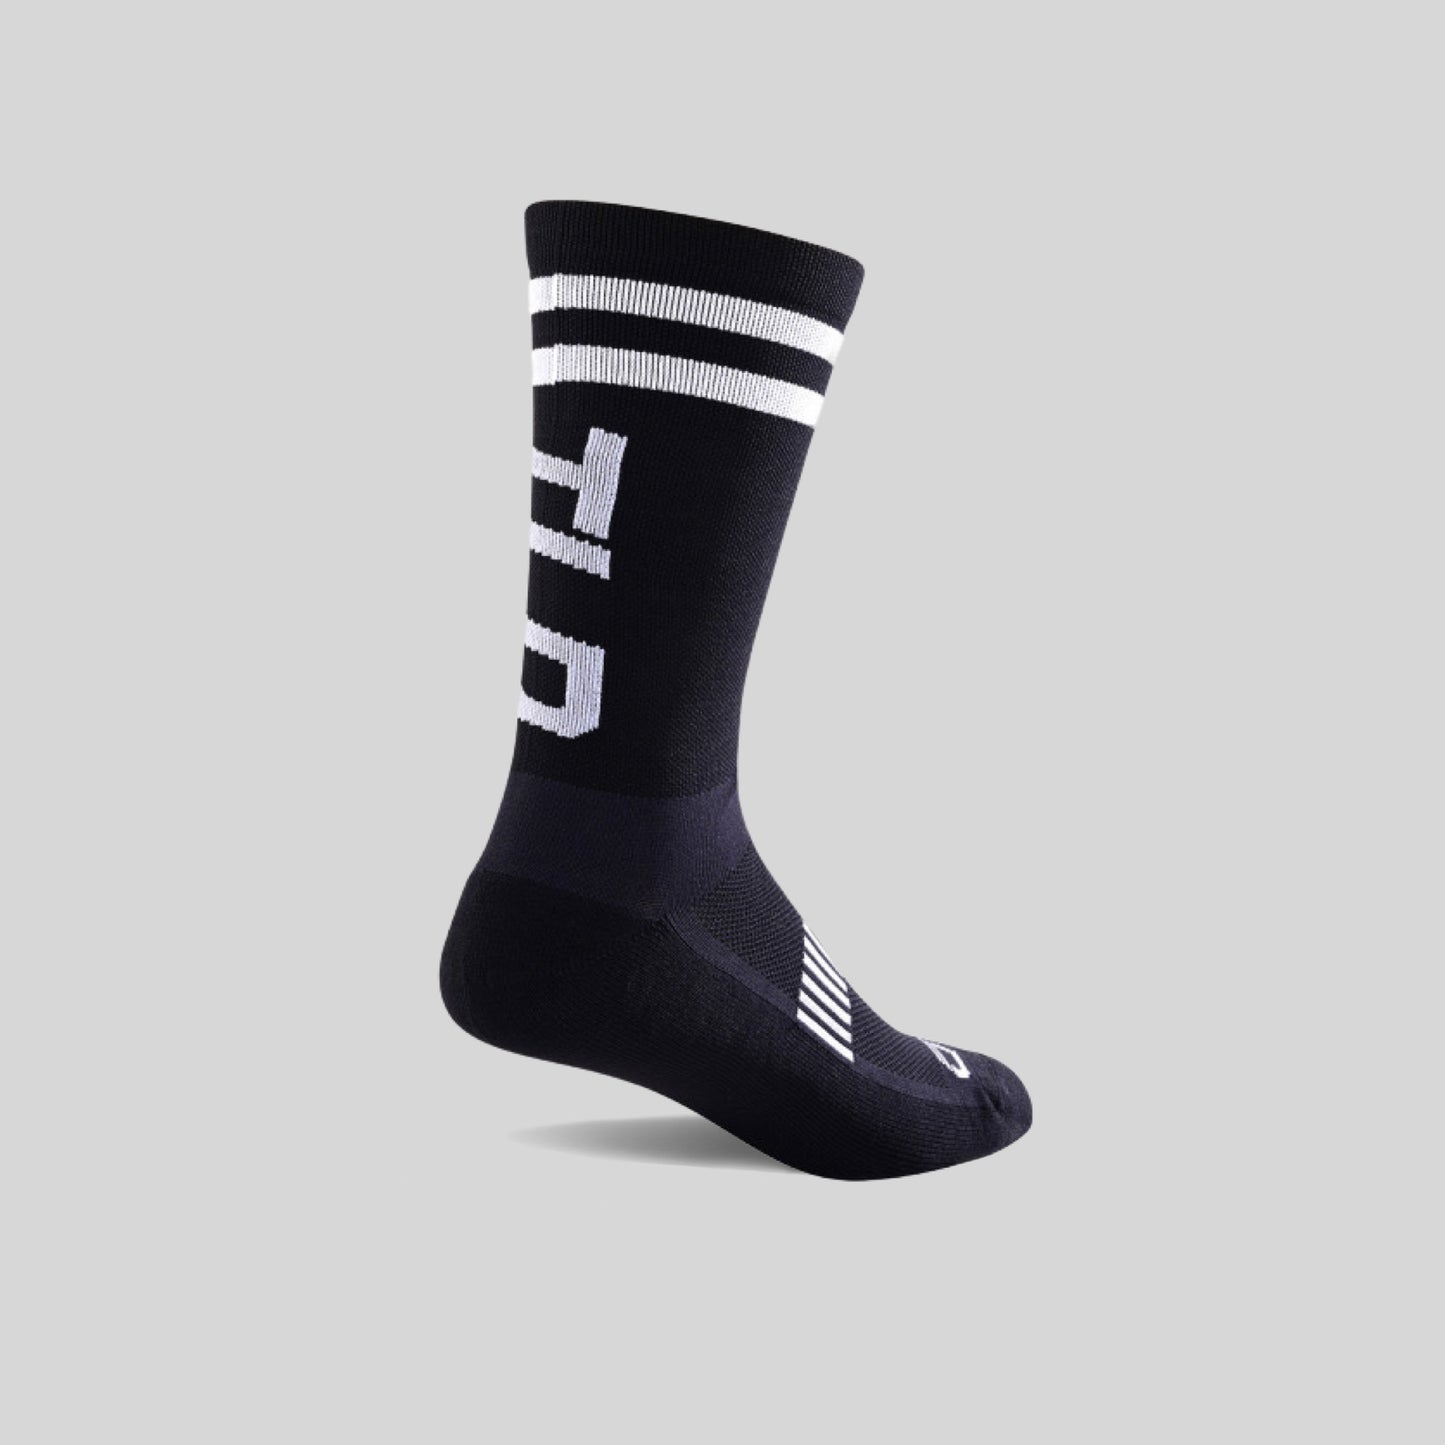 Troy Lee Designs Performance Speed Socks Black from Ascender Cycling Club Zürich Switzerland Right Side View